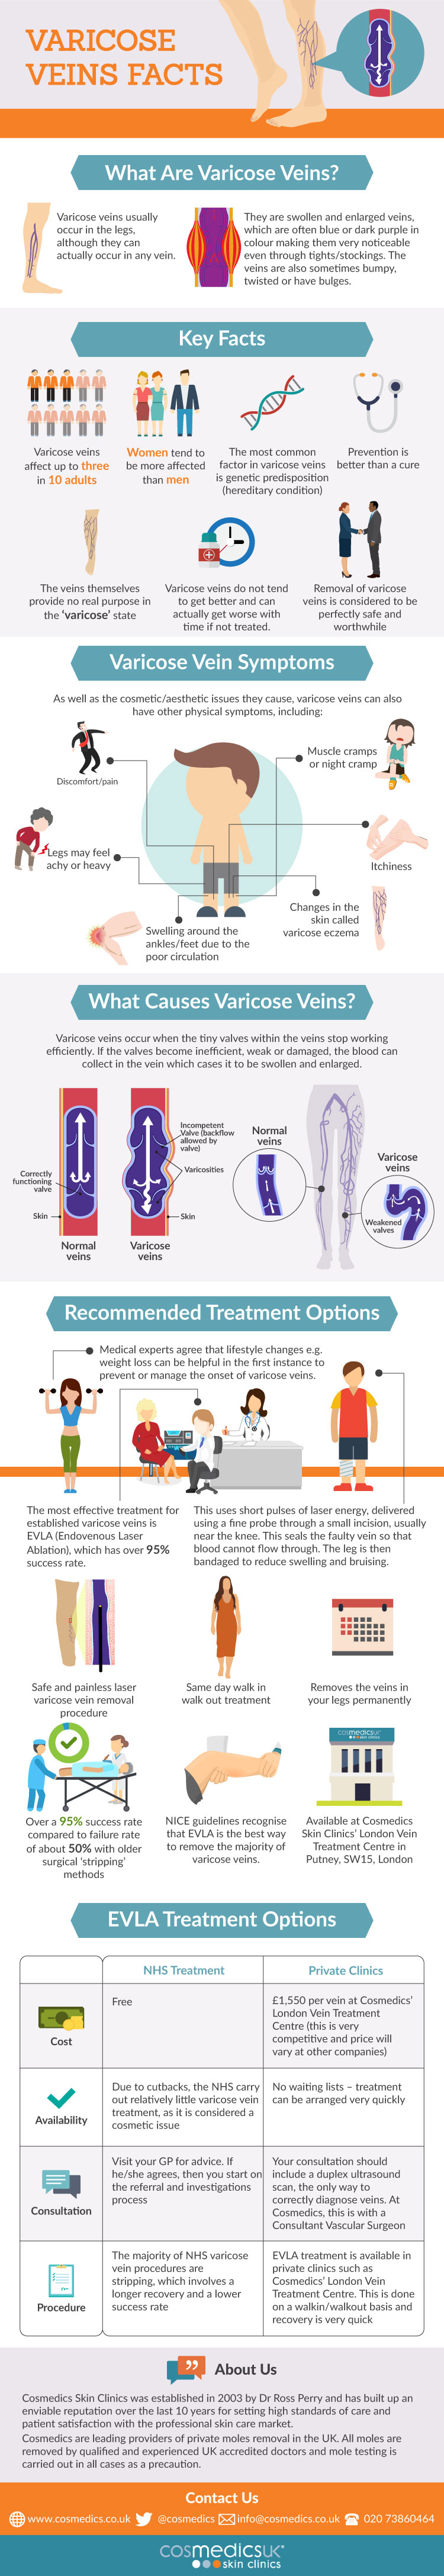 Varicose Vein Facts Infographic